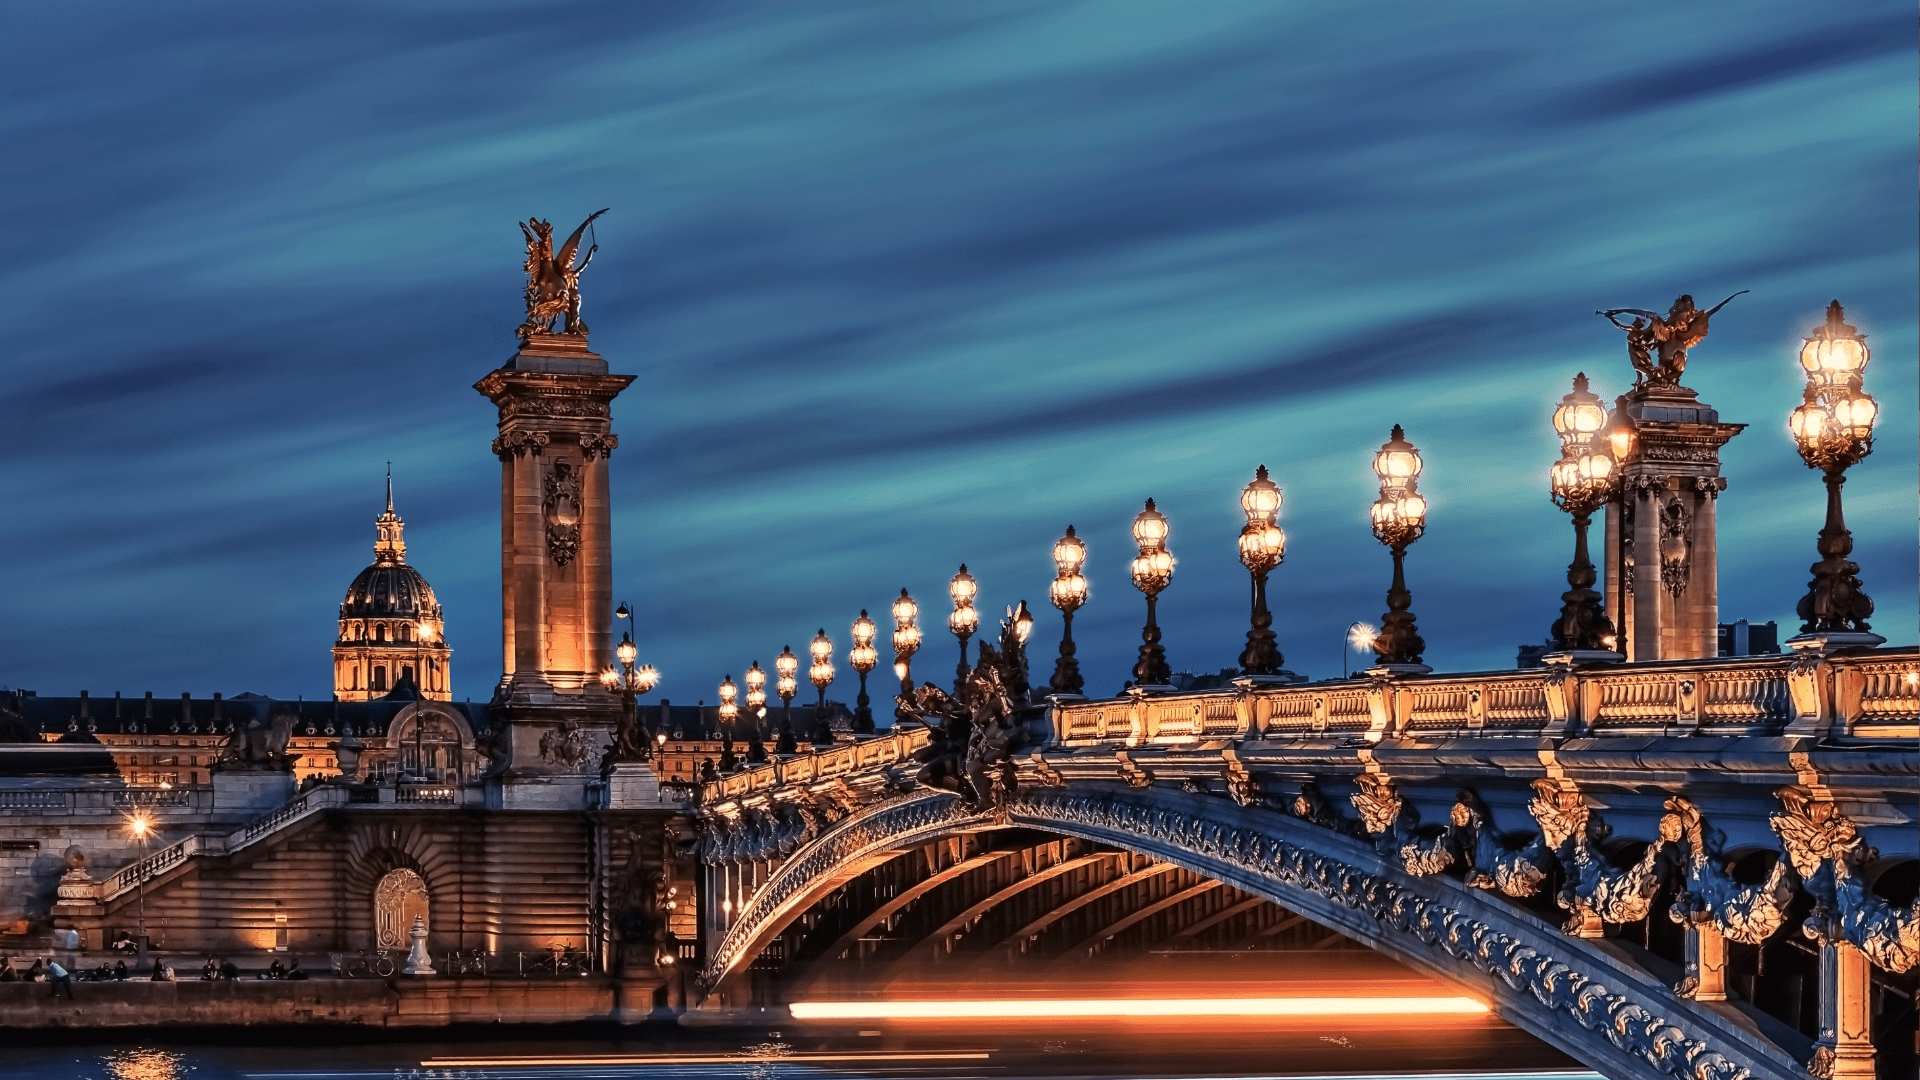 What To Do In Paris At Night